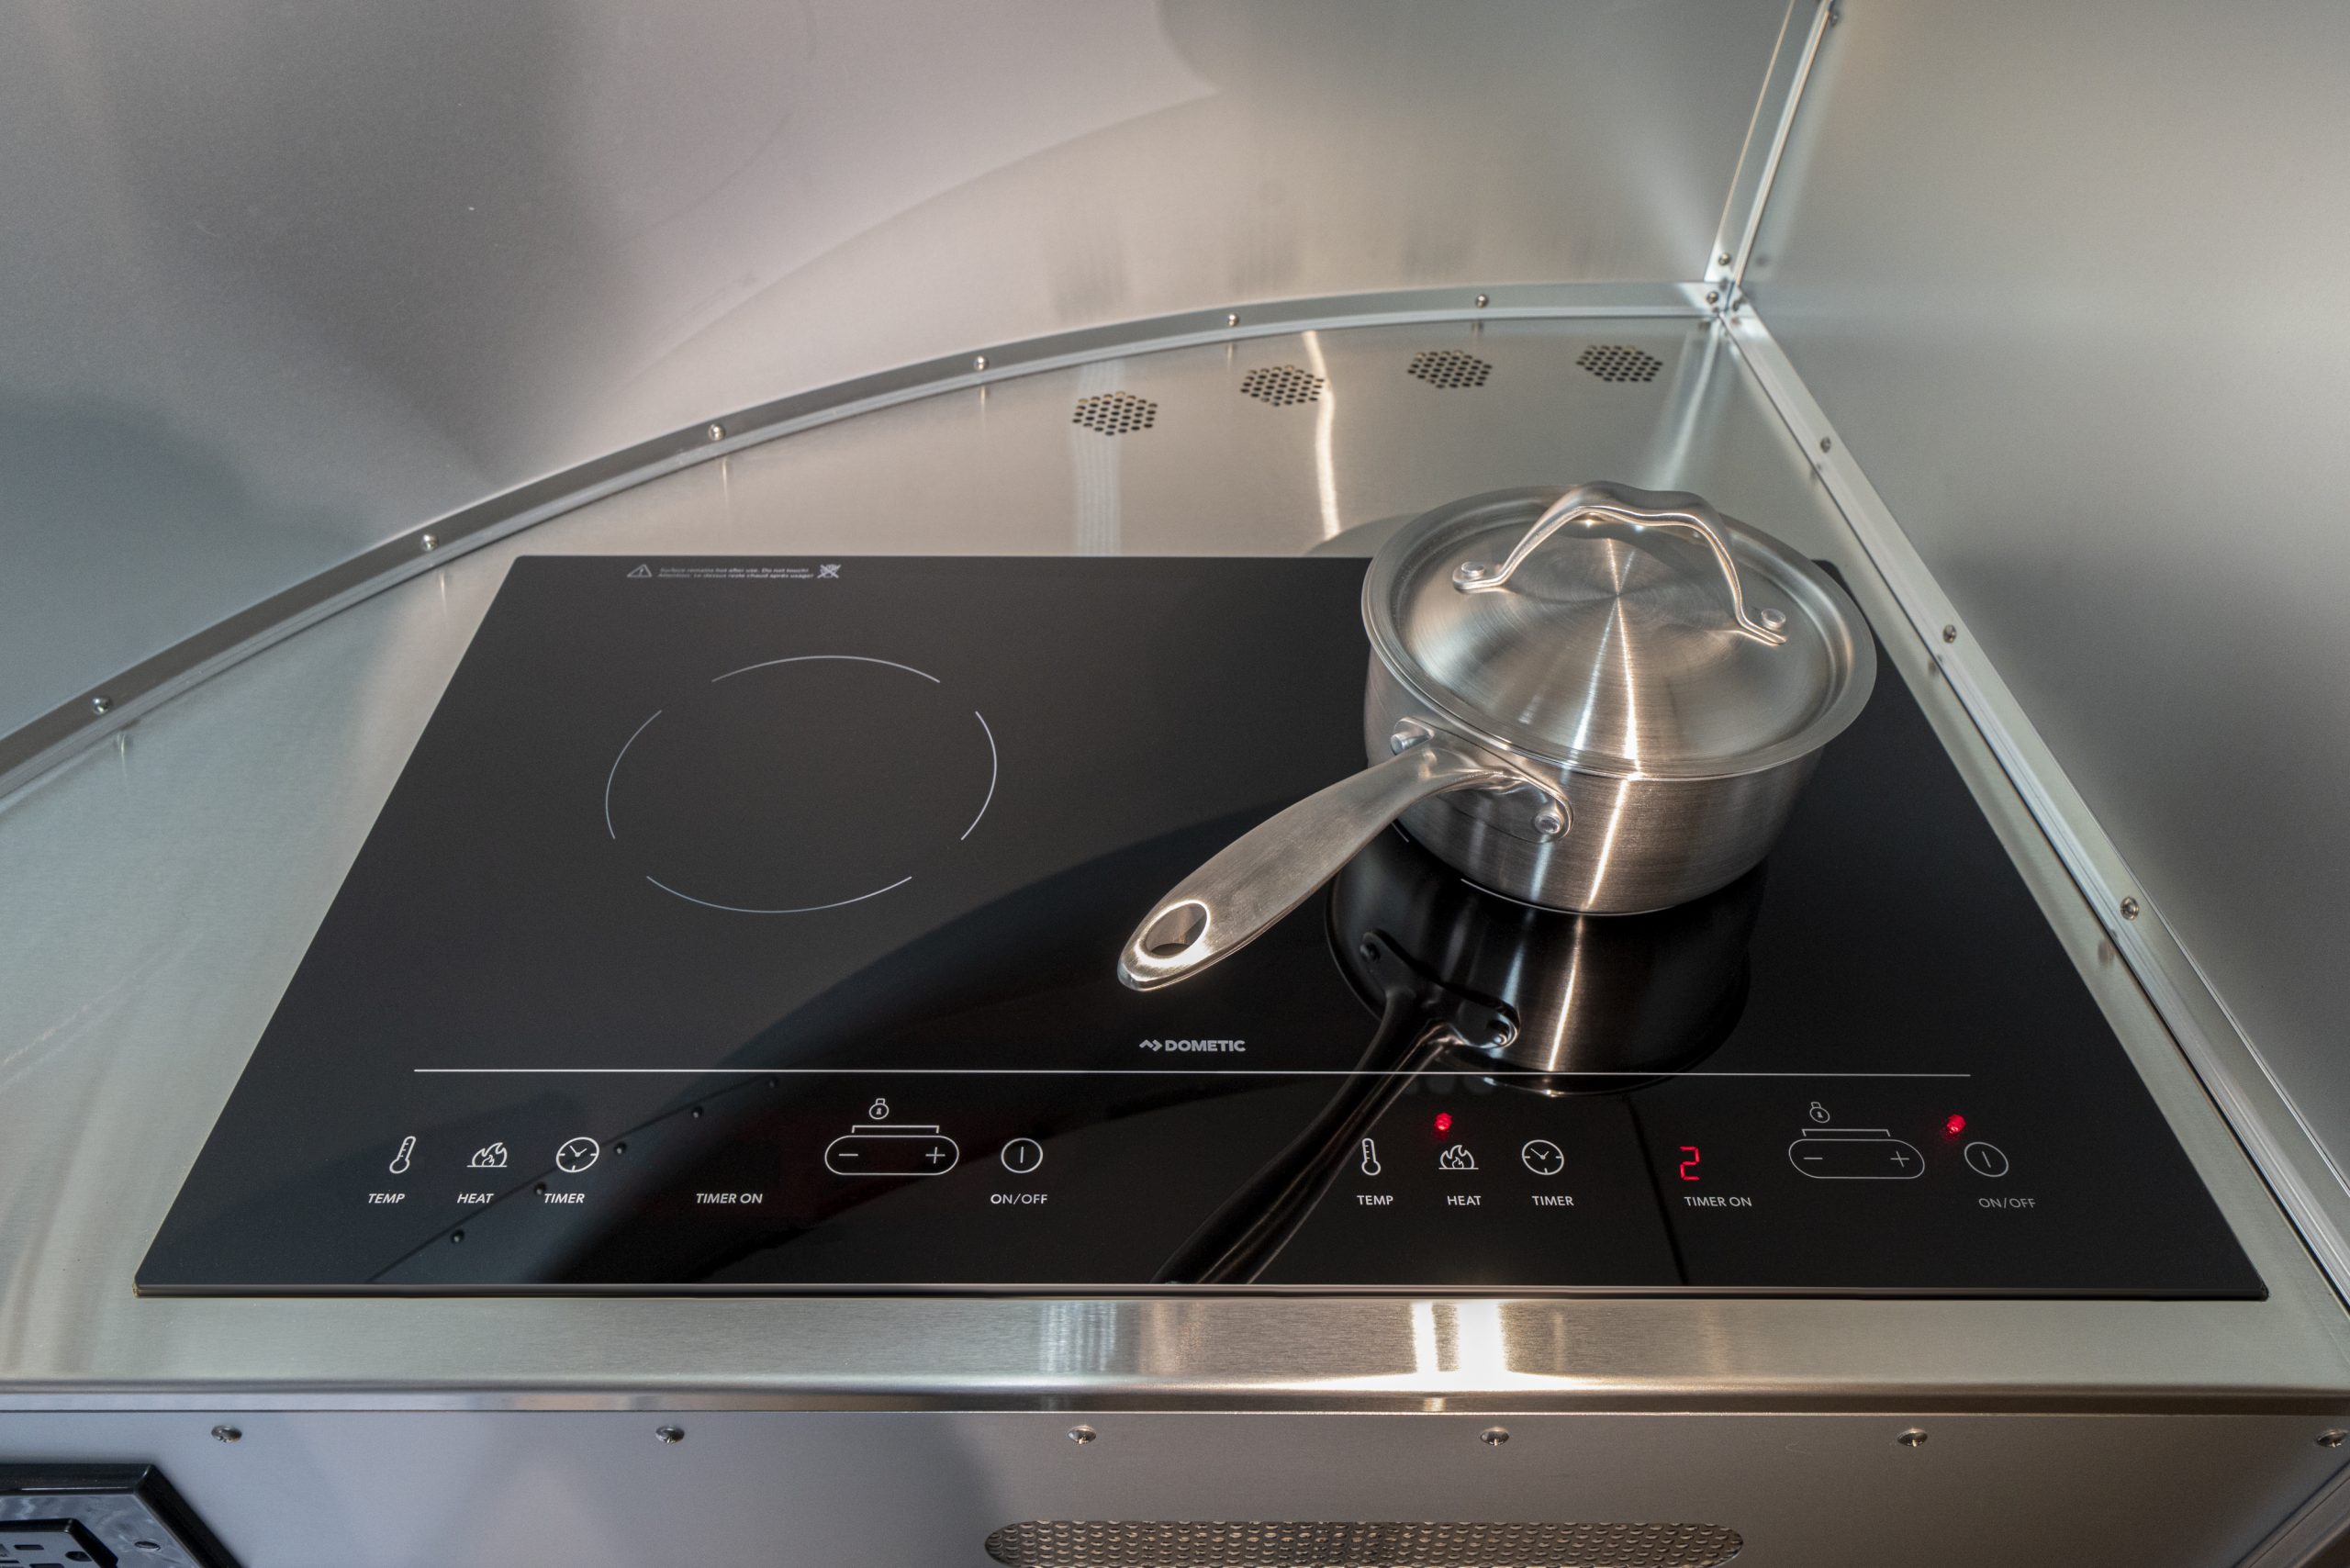 Volterra’s Induction Cooktop Leaves More Time for Fun